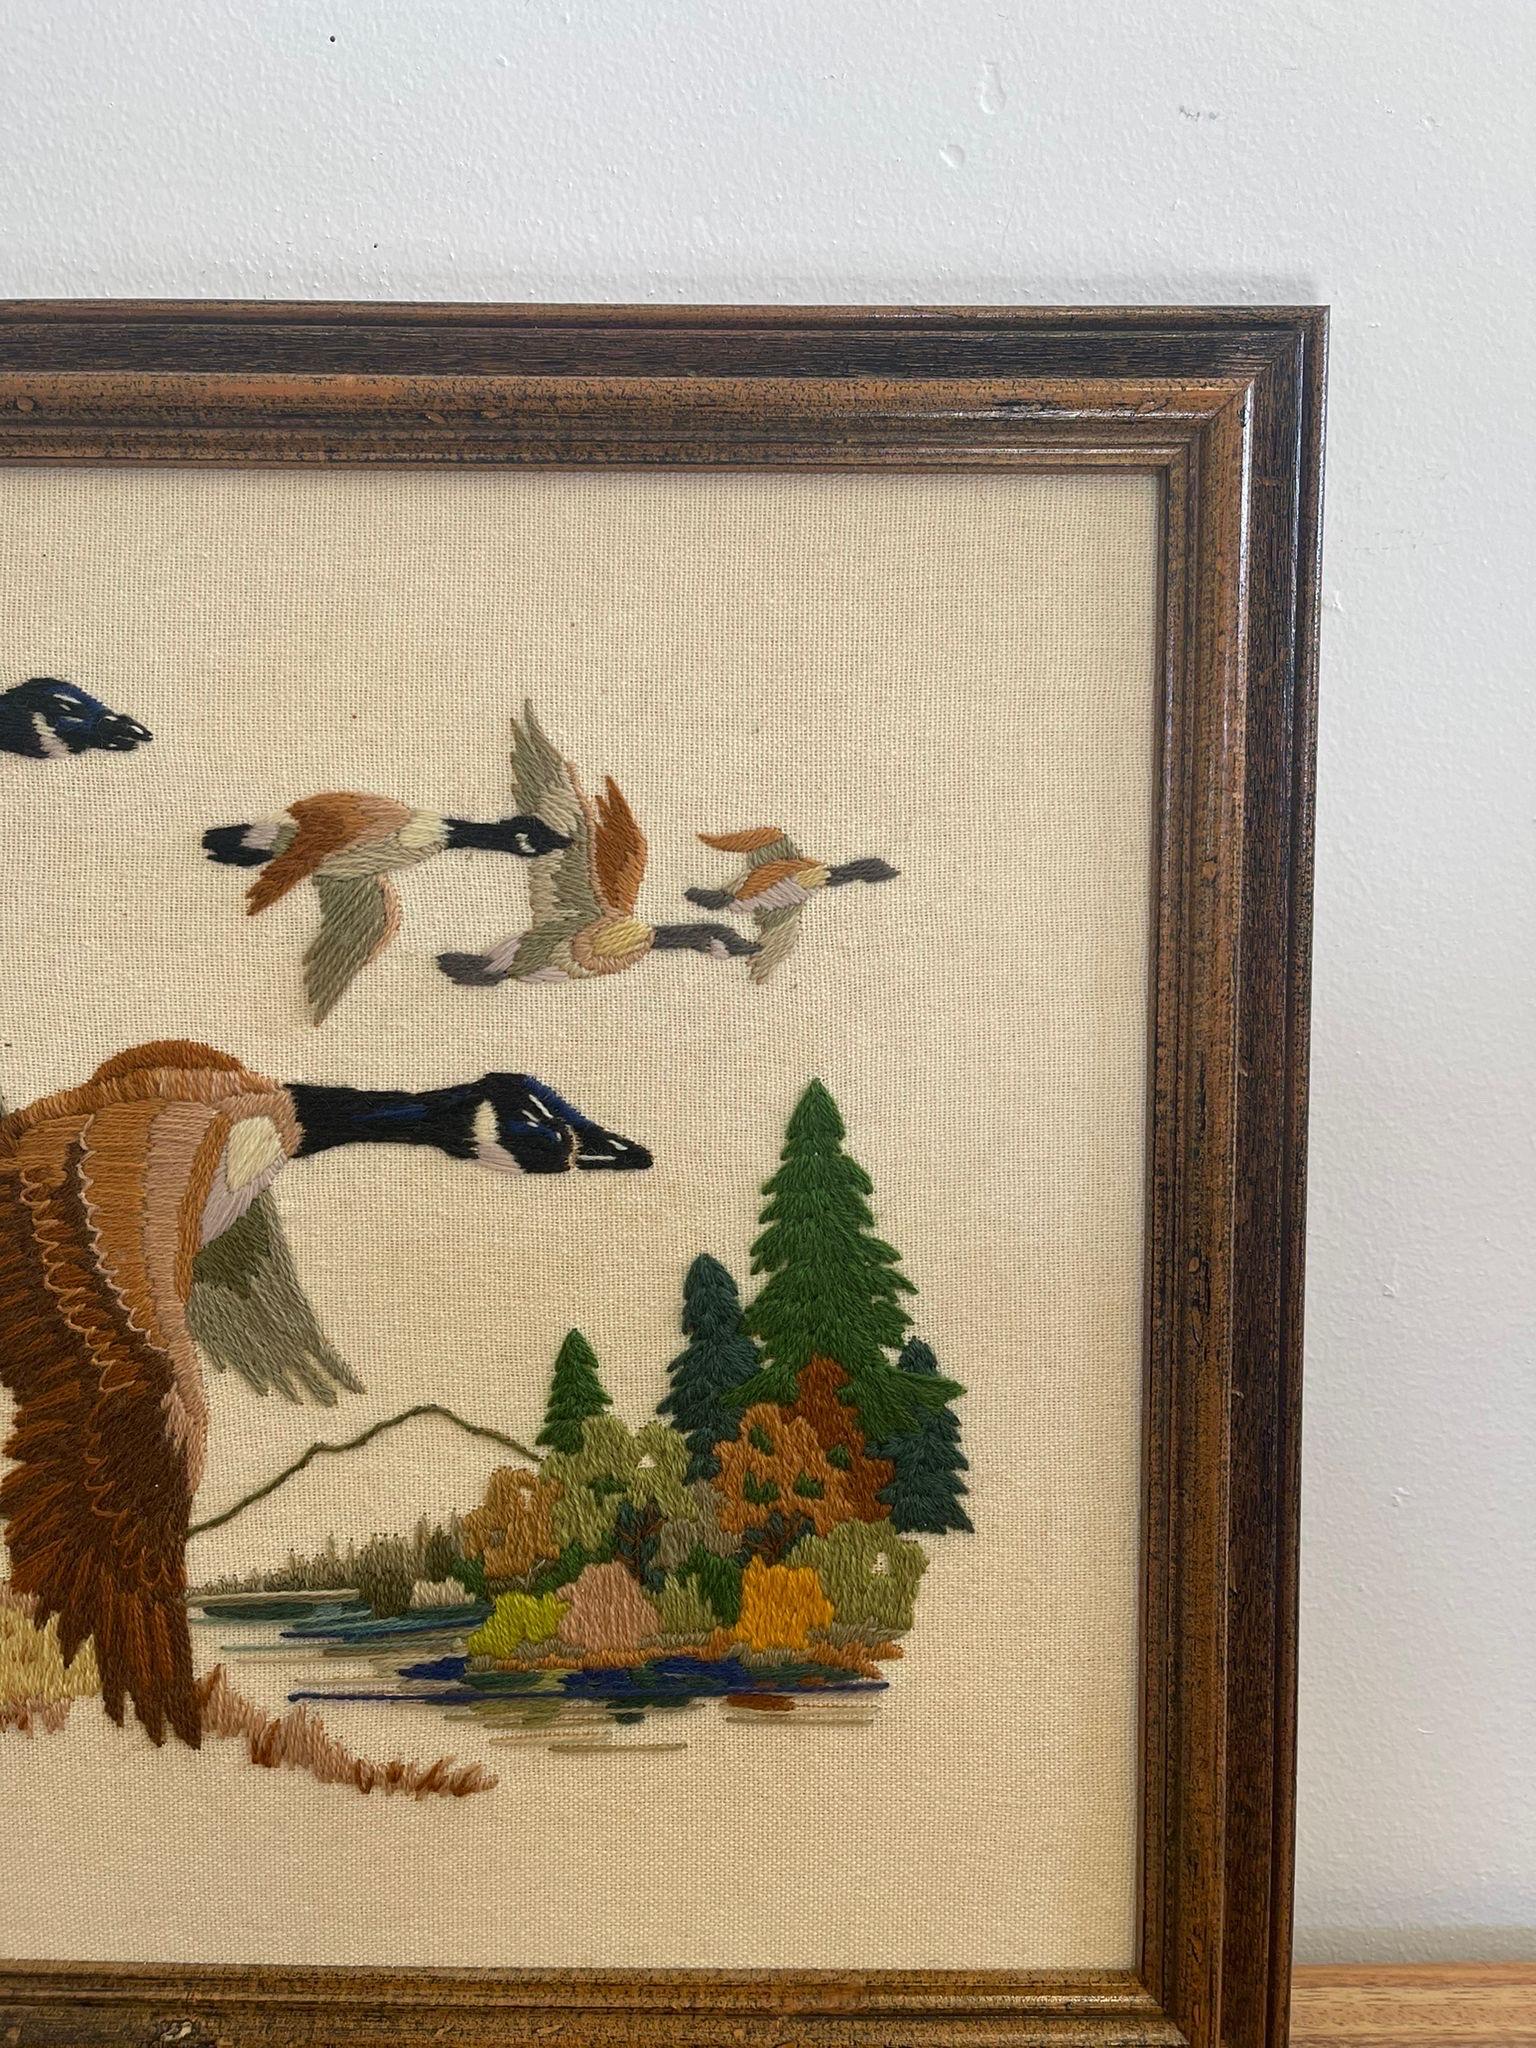 Late 20th Century Vintage Handmade Geese Needlepoint Embroidery Artwork Within Wood Frame.